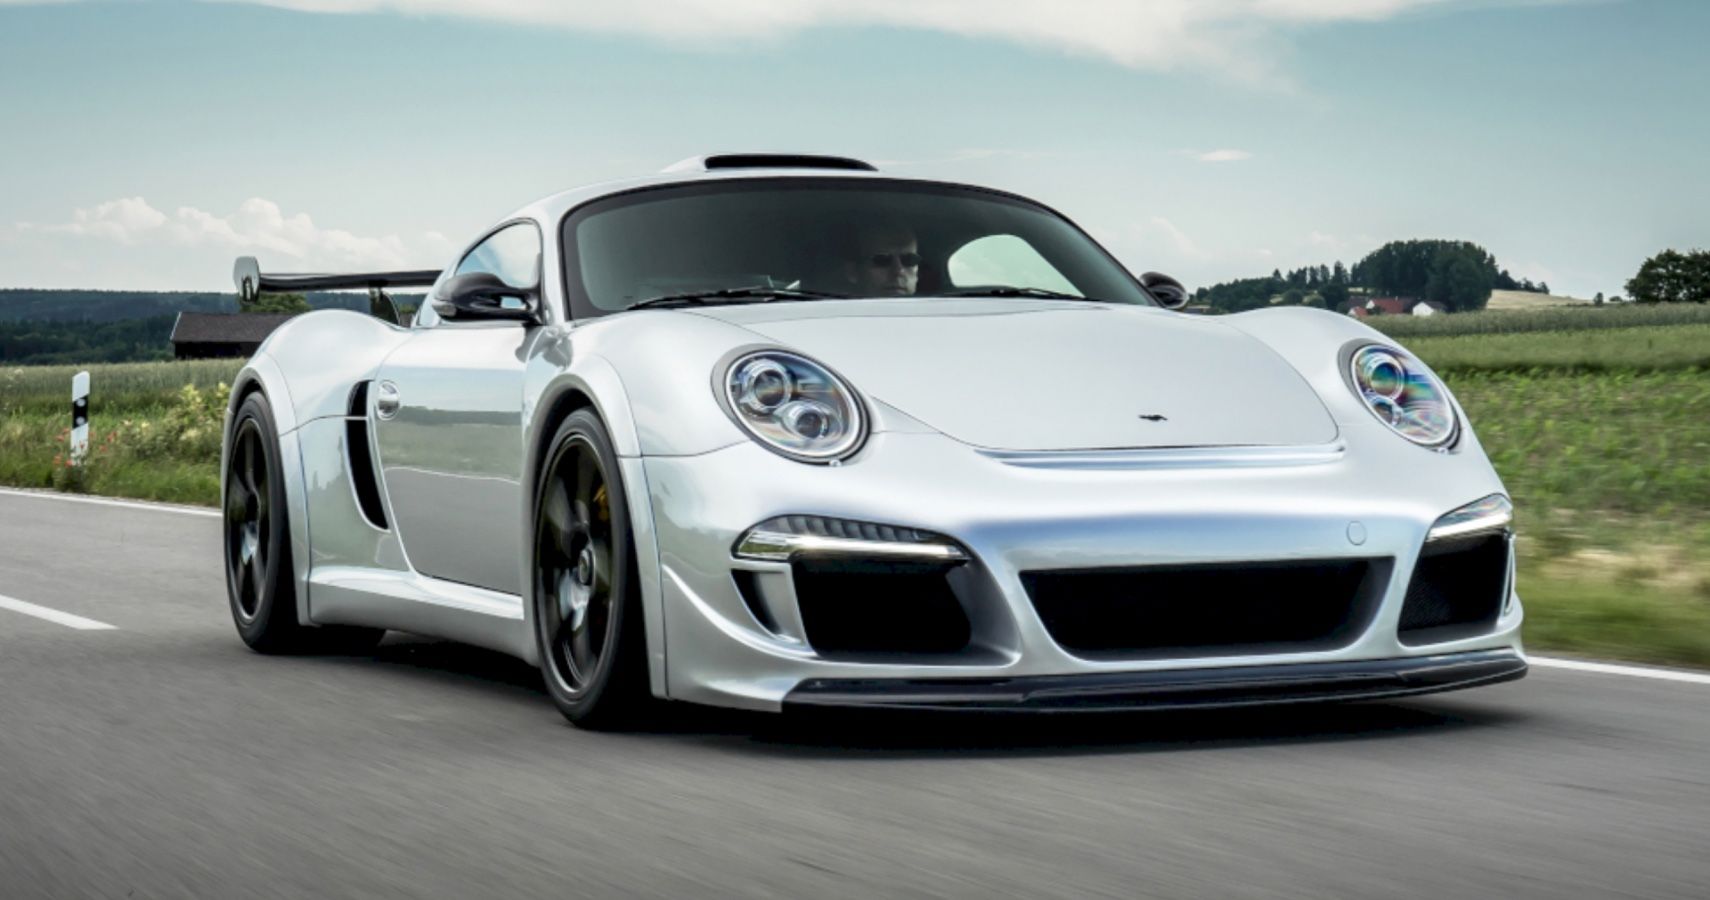 2007 Silver Ruf CTR 3 Clubsport Being Driven